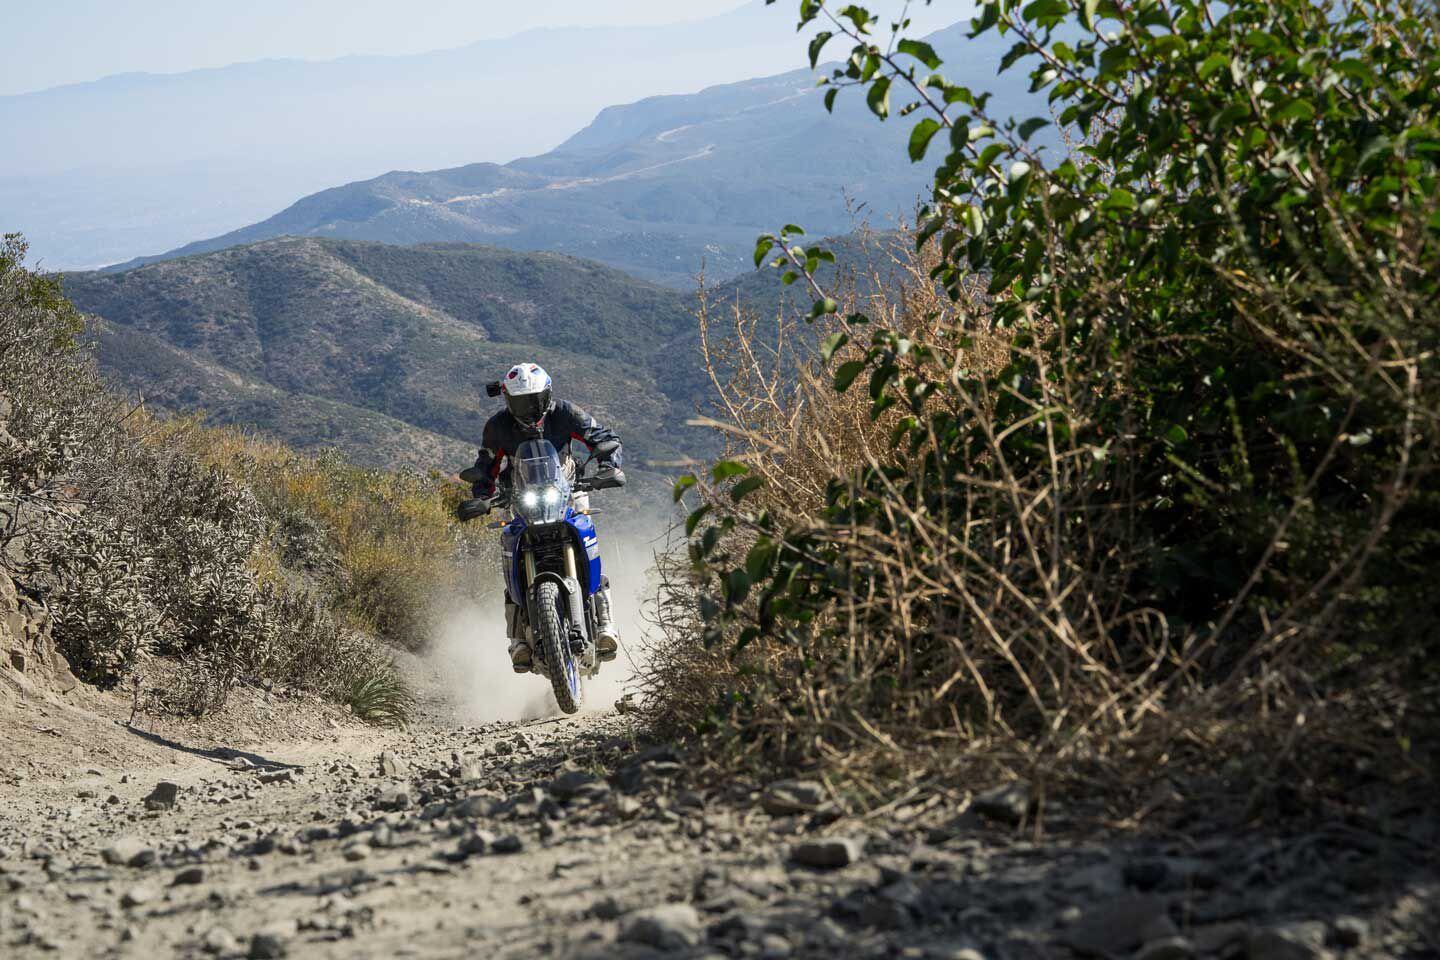 As usual Yamaha’s Ténéré 700 impresses with how easy it is to ride off-road as well as on.